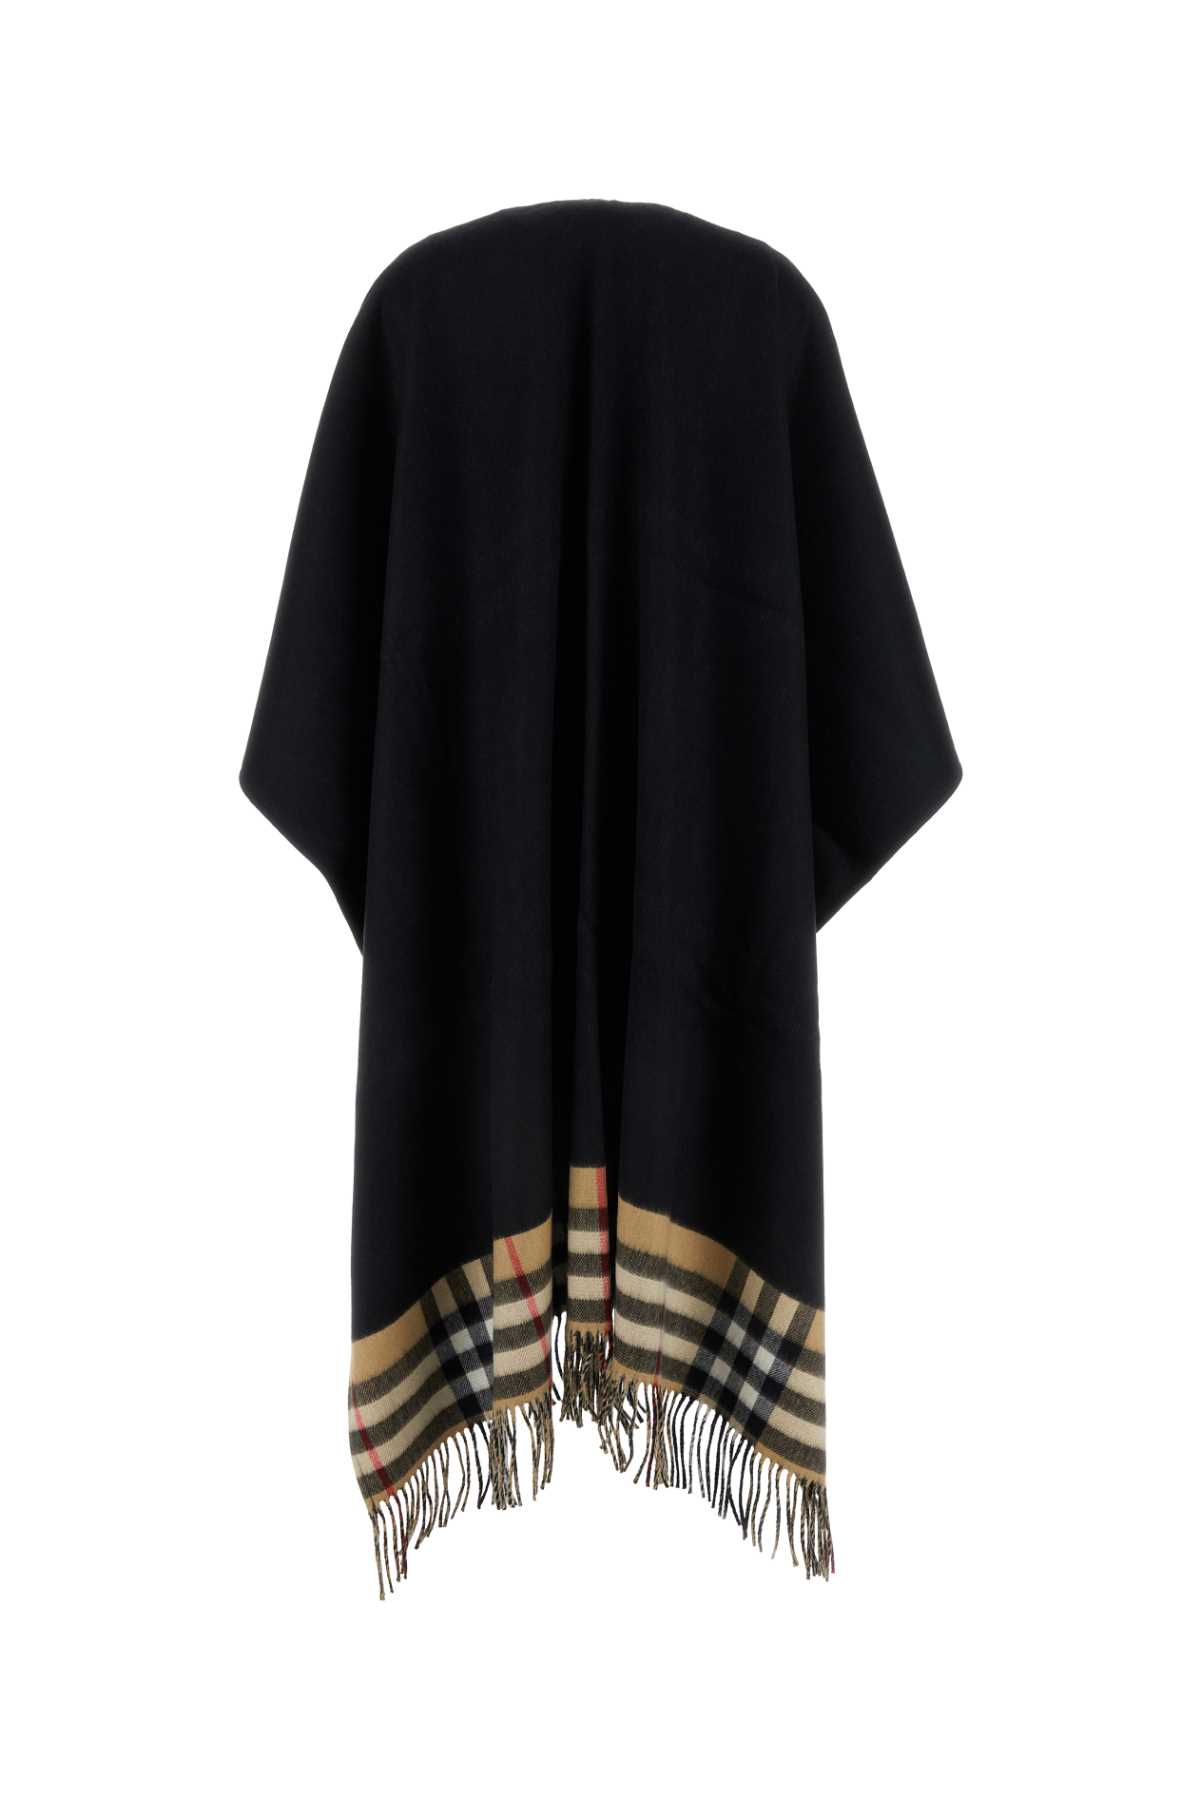 Burberry Black Cashmere And Wool Cape